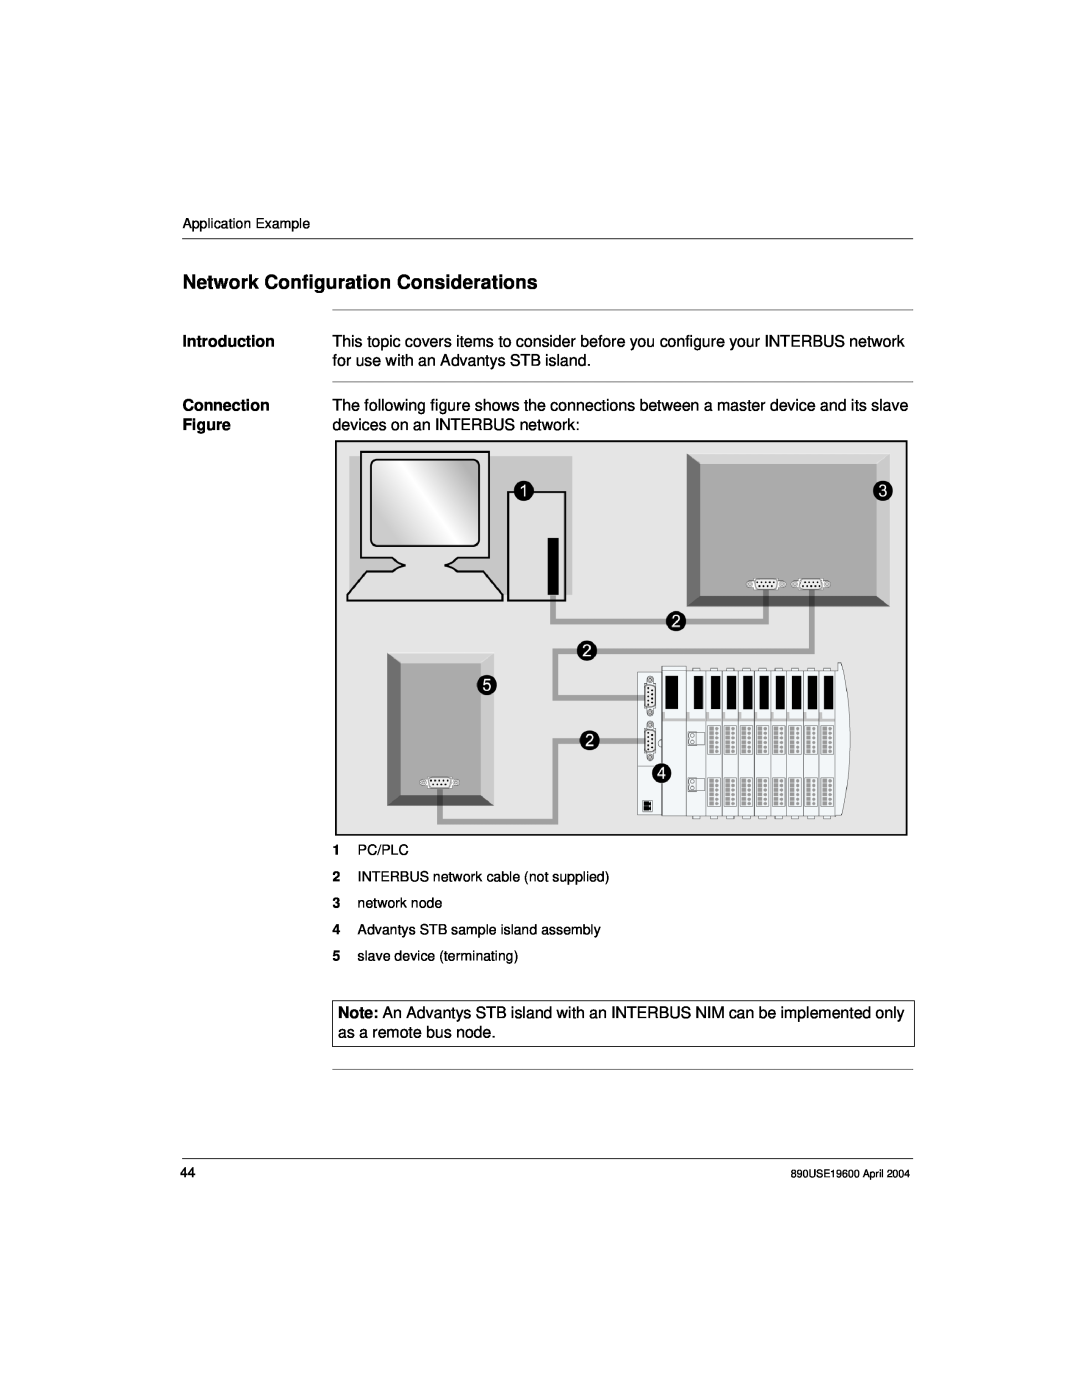 Schneider Electric 890USE19600 Version 1.0, INTERBUS Basic Network Interface Module Network Configuration Considerations 